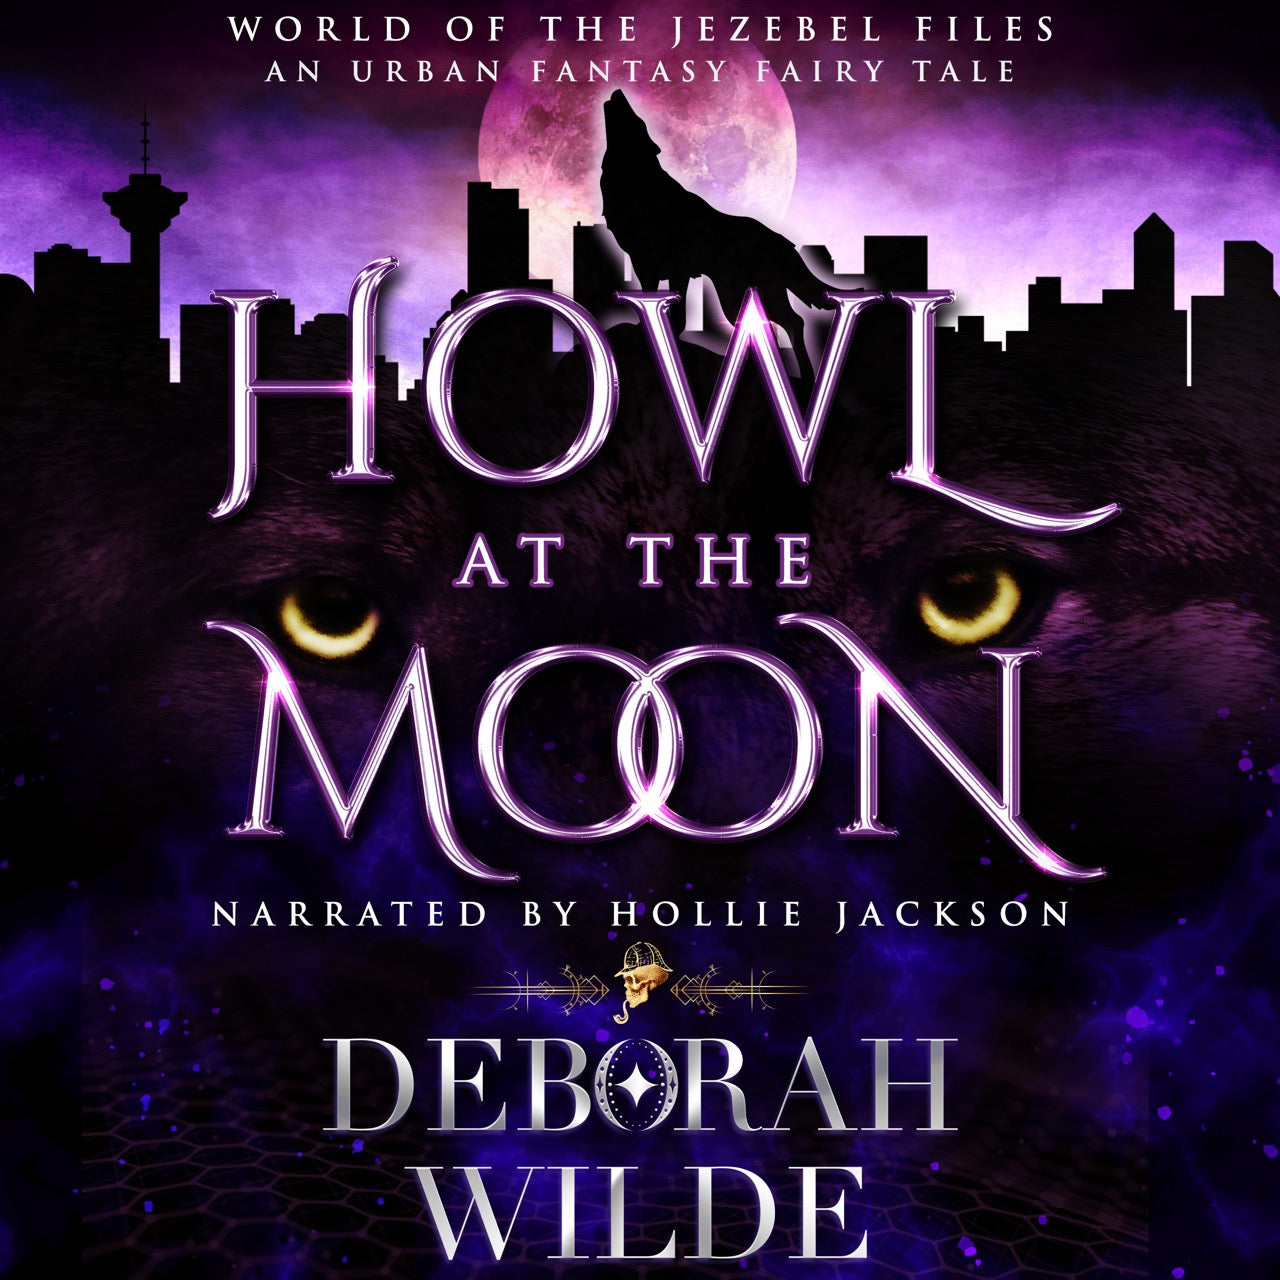 The World of the Jezebel Files expands in this urban fantasy fairy tale. Listen to Howl at the Moon by Deborah Wilde, read by Hollie Jackson